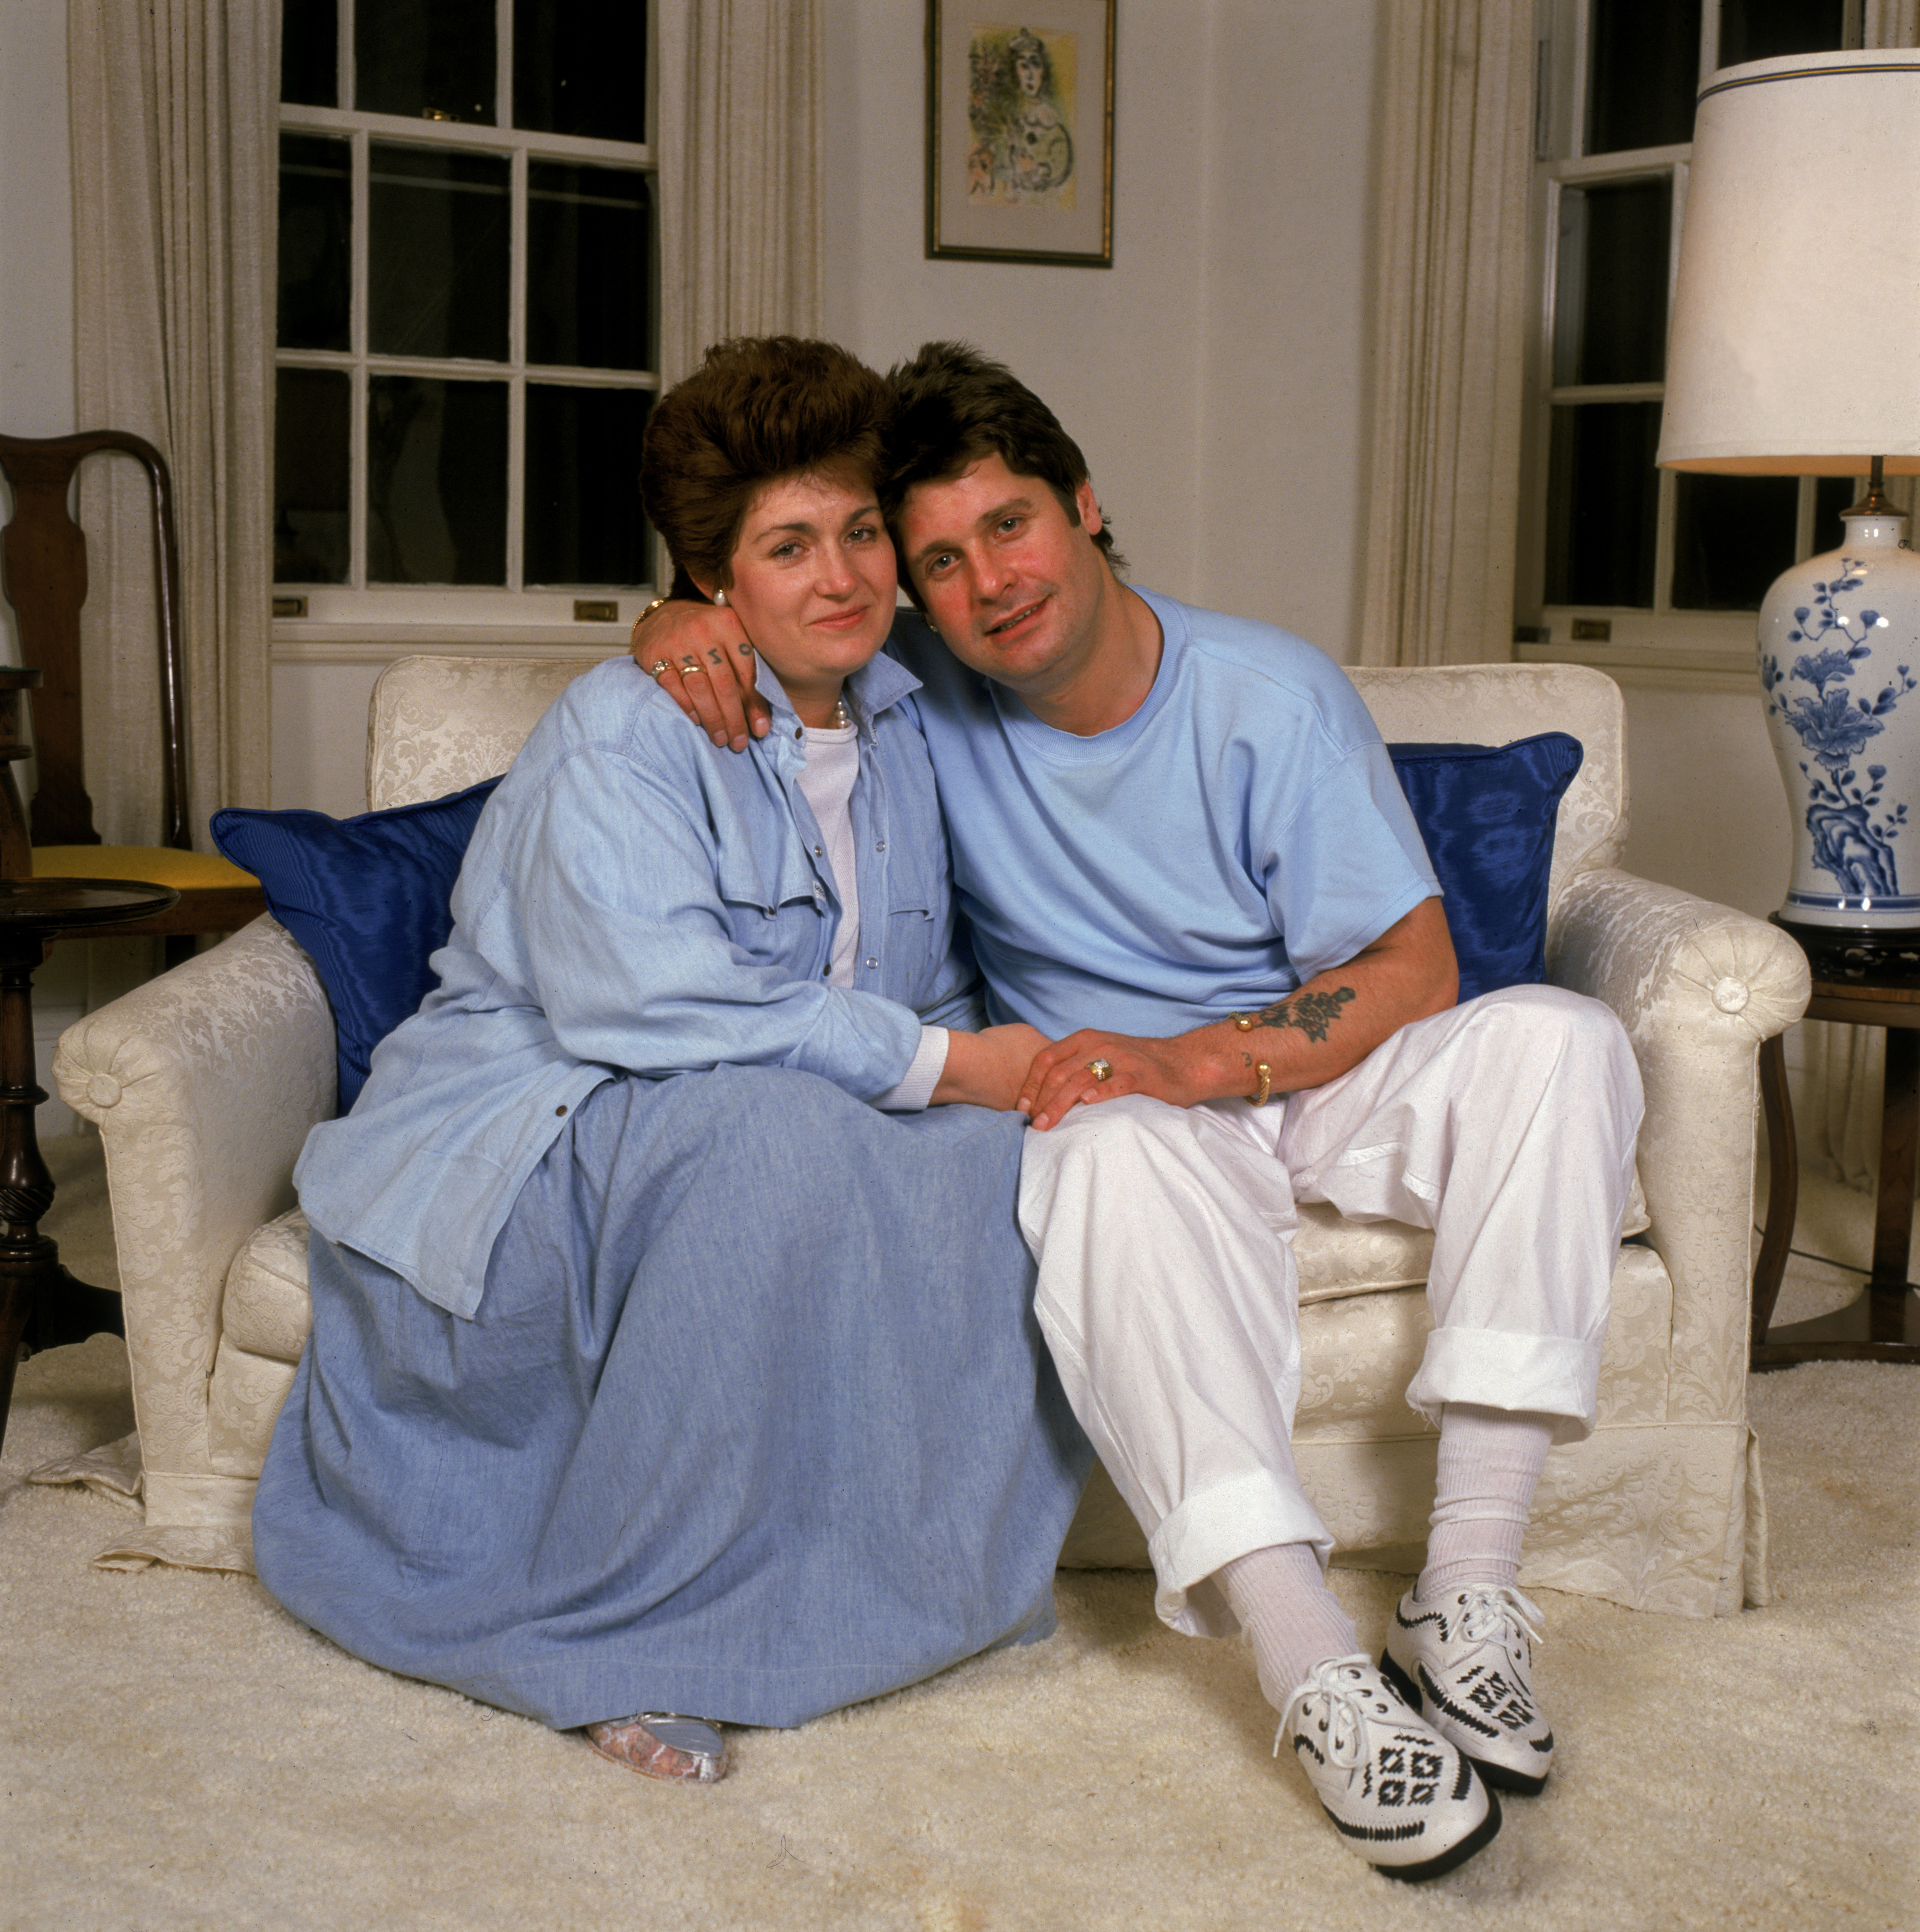 A file photo of Ozzy Osbourne and Sharon Osbourne in 1987 | Source: Getty Images